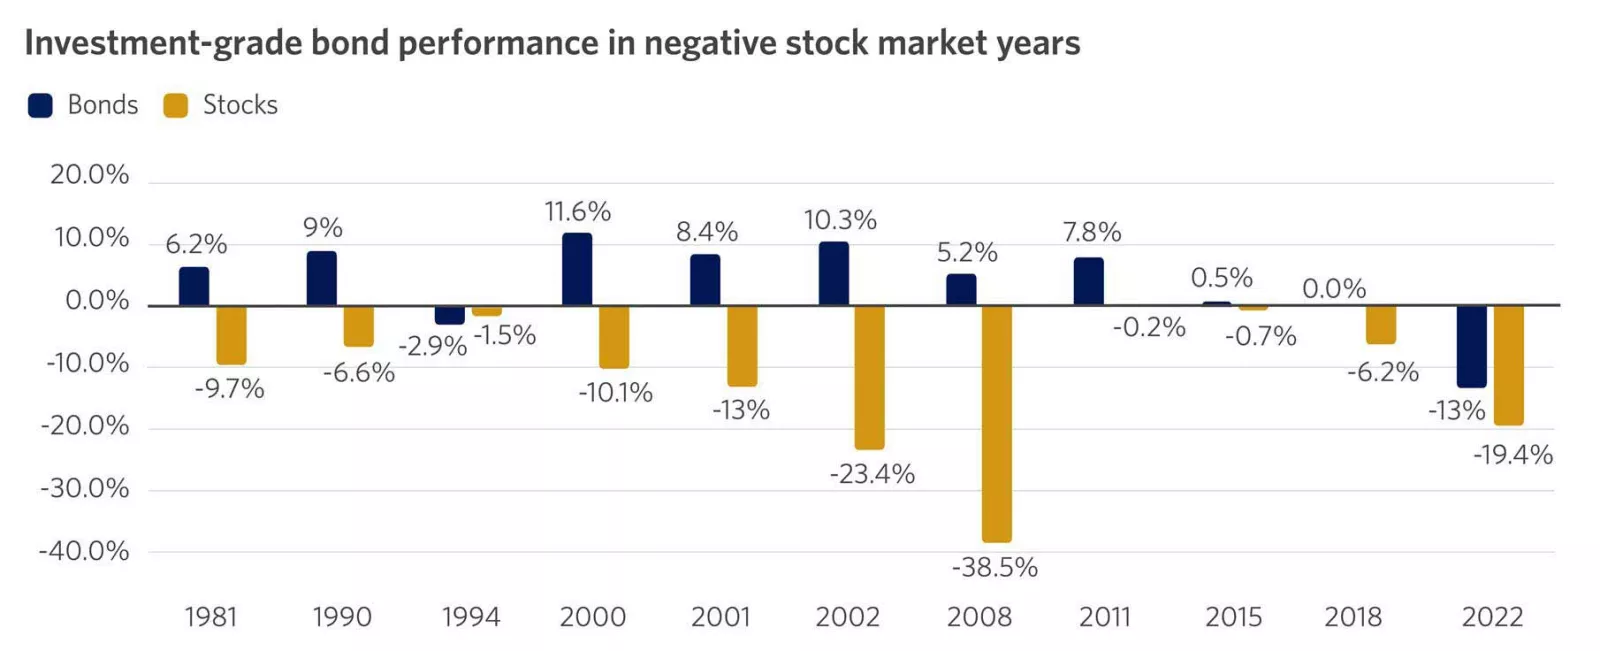 The graph shows the performance of investment grade bonds in negative stock market years.